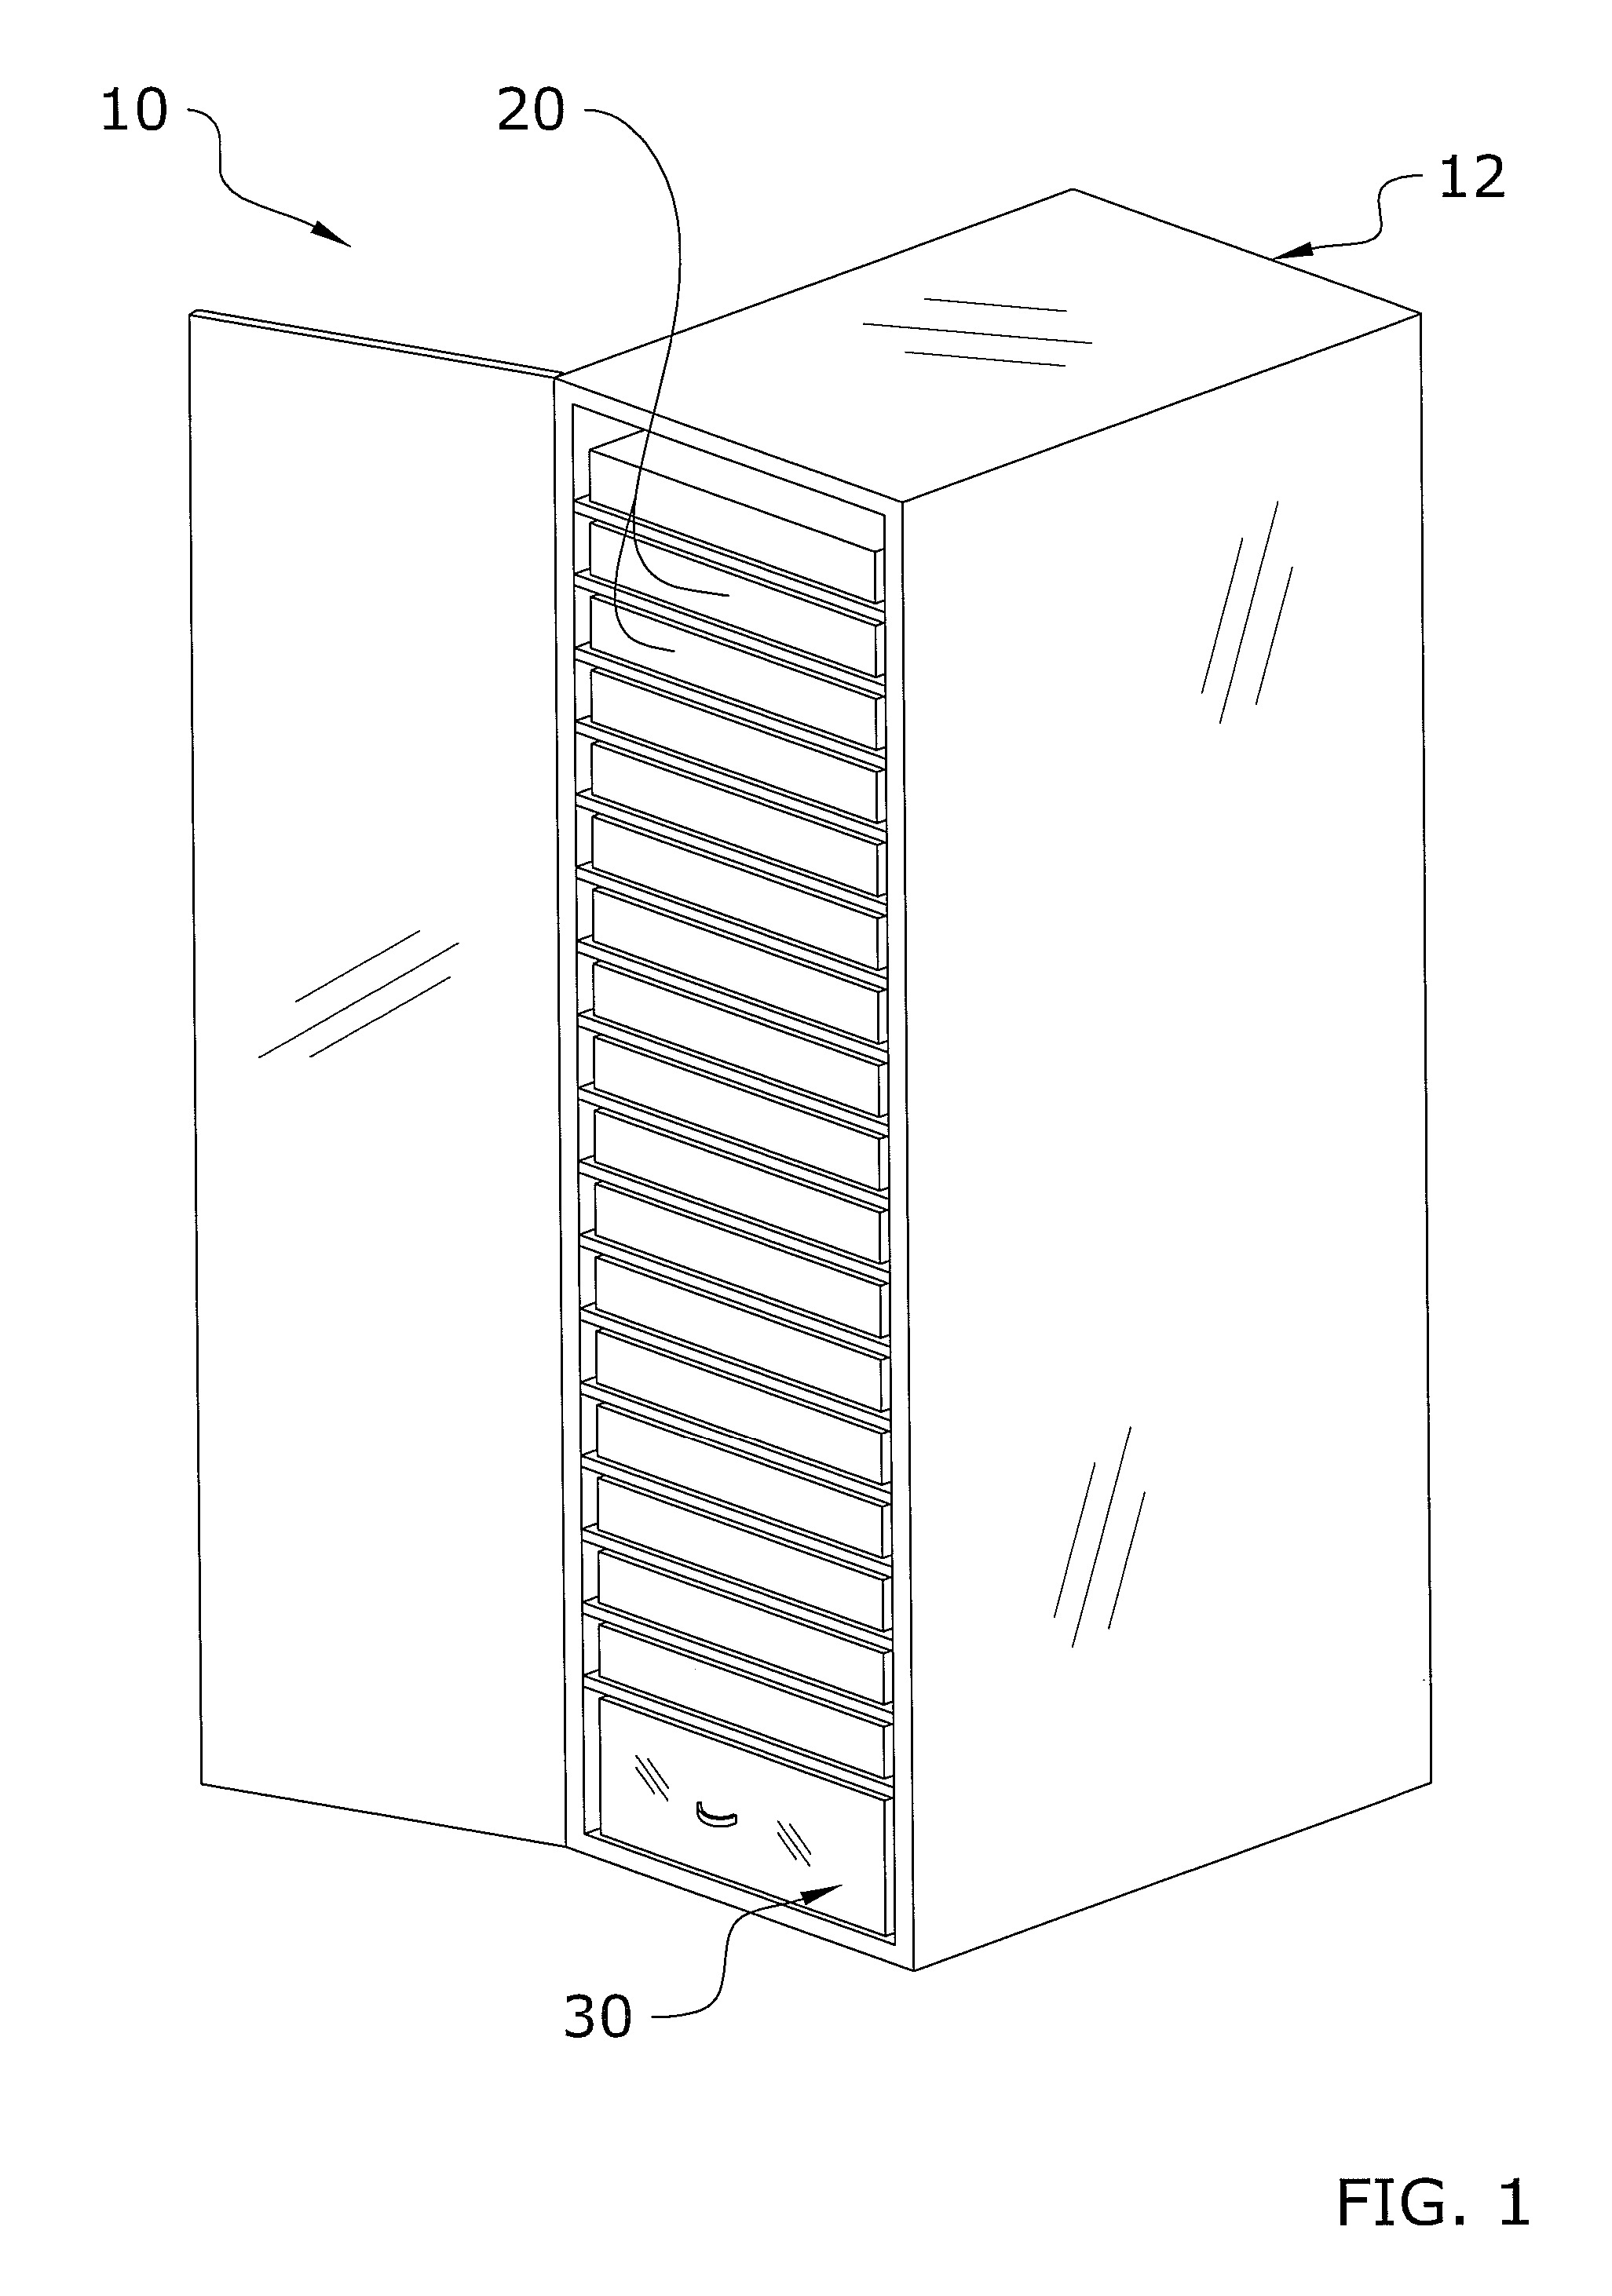 Manifold for a Two-Phase Cooling System